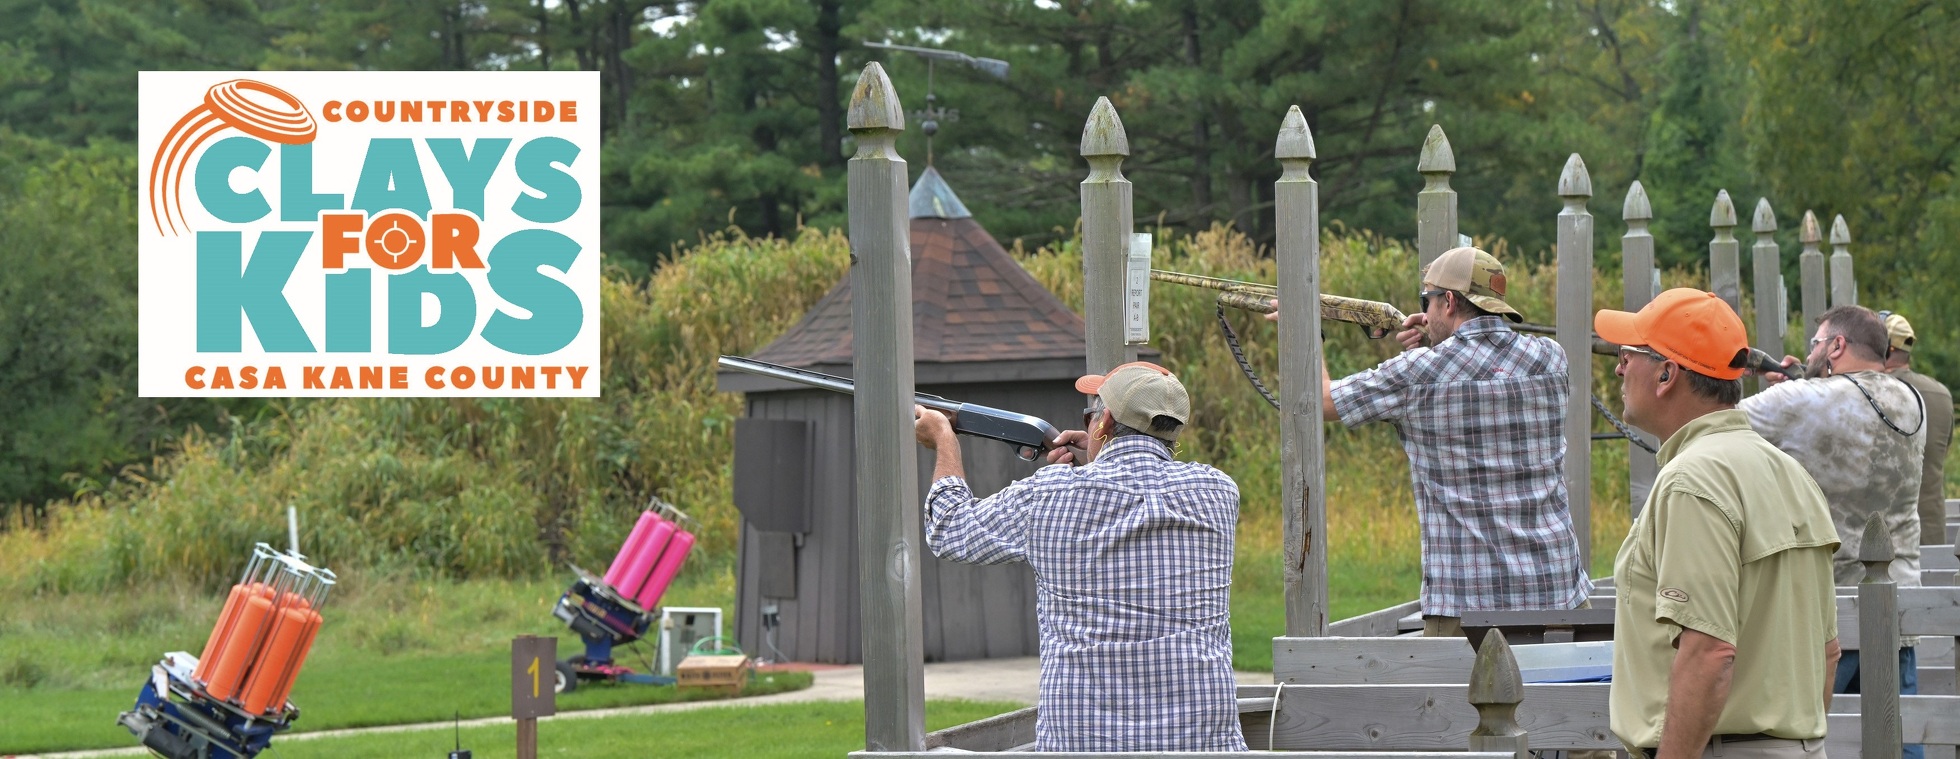 CASA Kane County's Countryside Clays for Kids